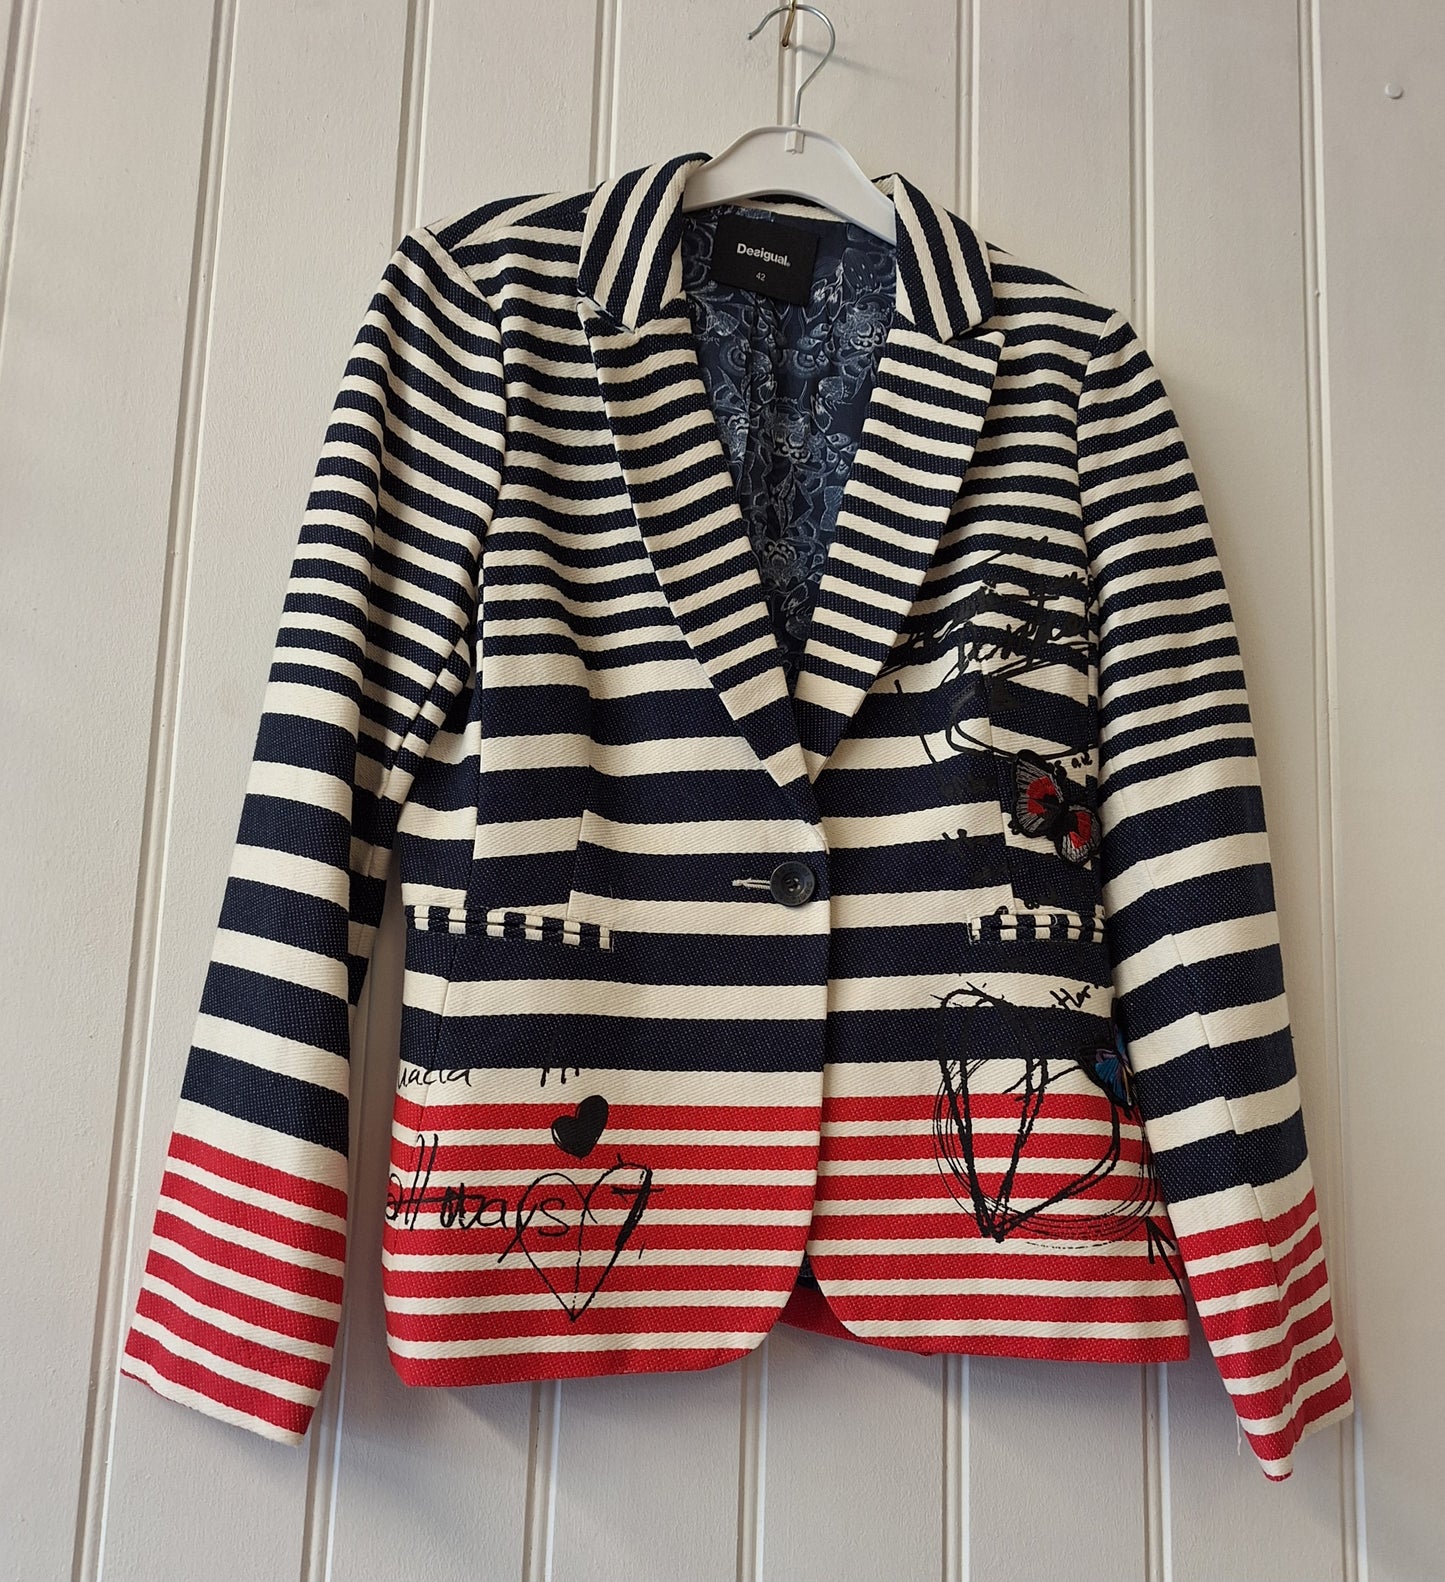 Desigual navy, red and white jacket 10/12